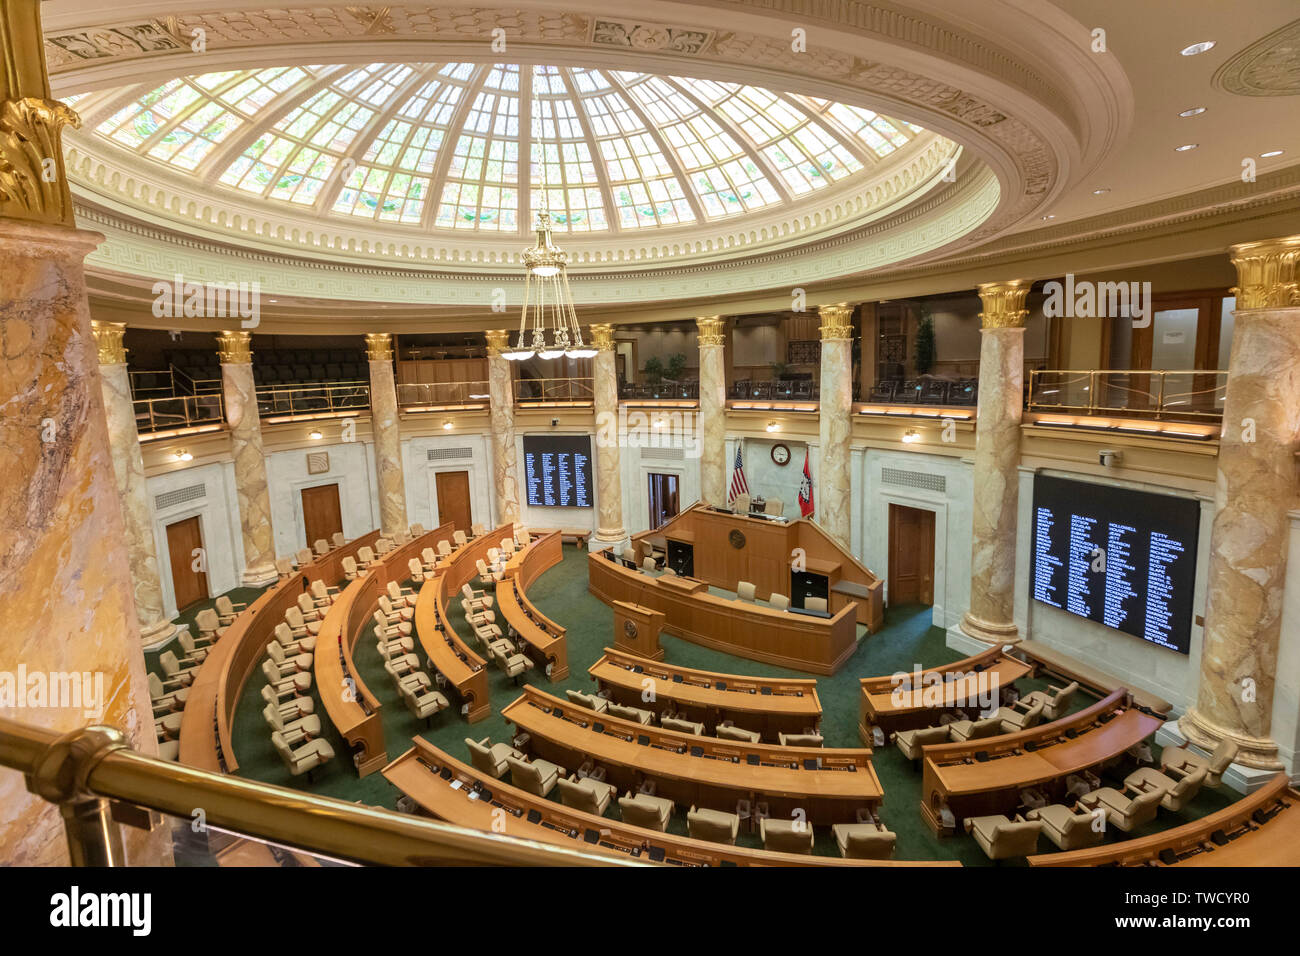 Little Rock, Arkansas - The House of Representatives chamber in the Arkansas state capitol building. Stock Photo